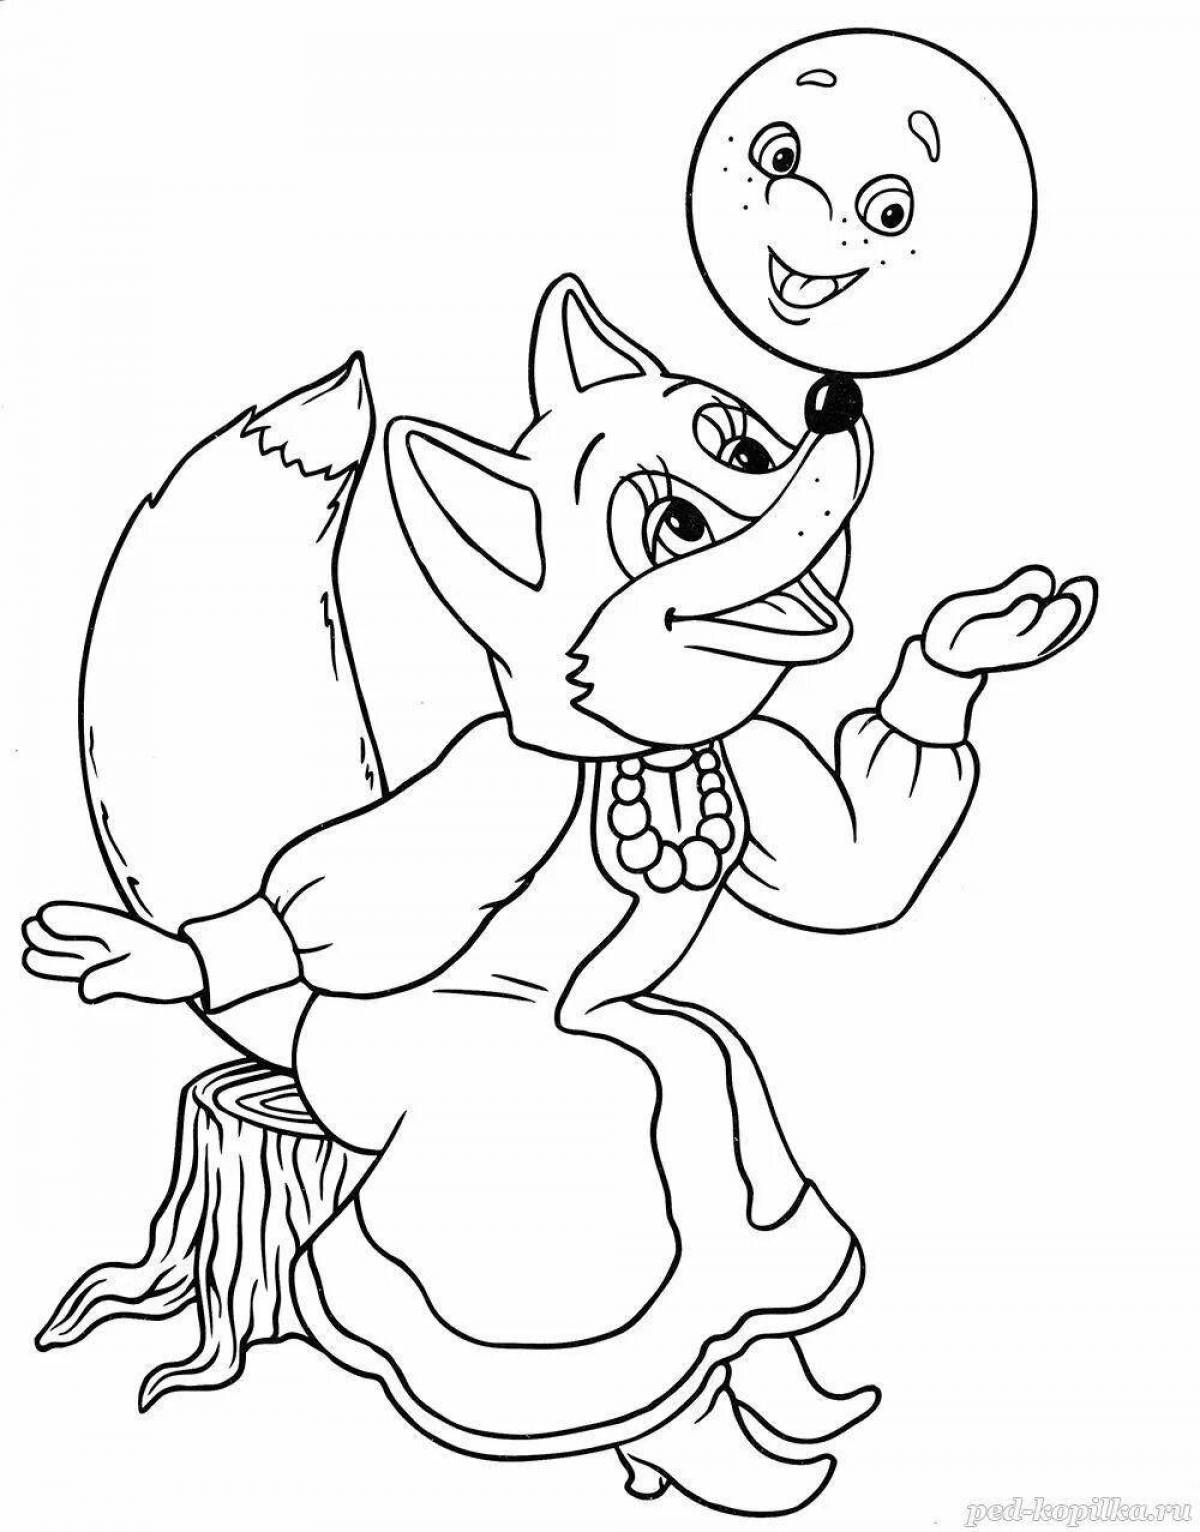 Majestic coloring pages heroes of Russian folk tales